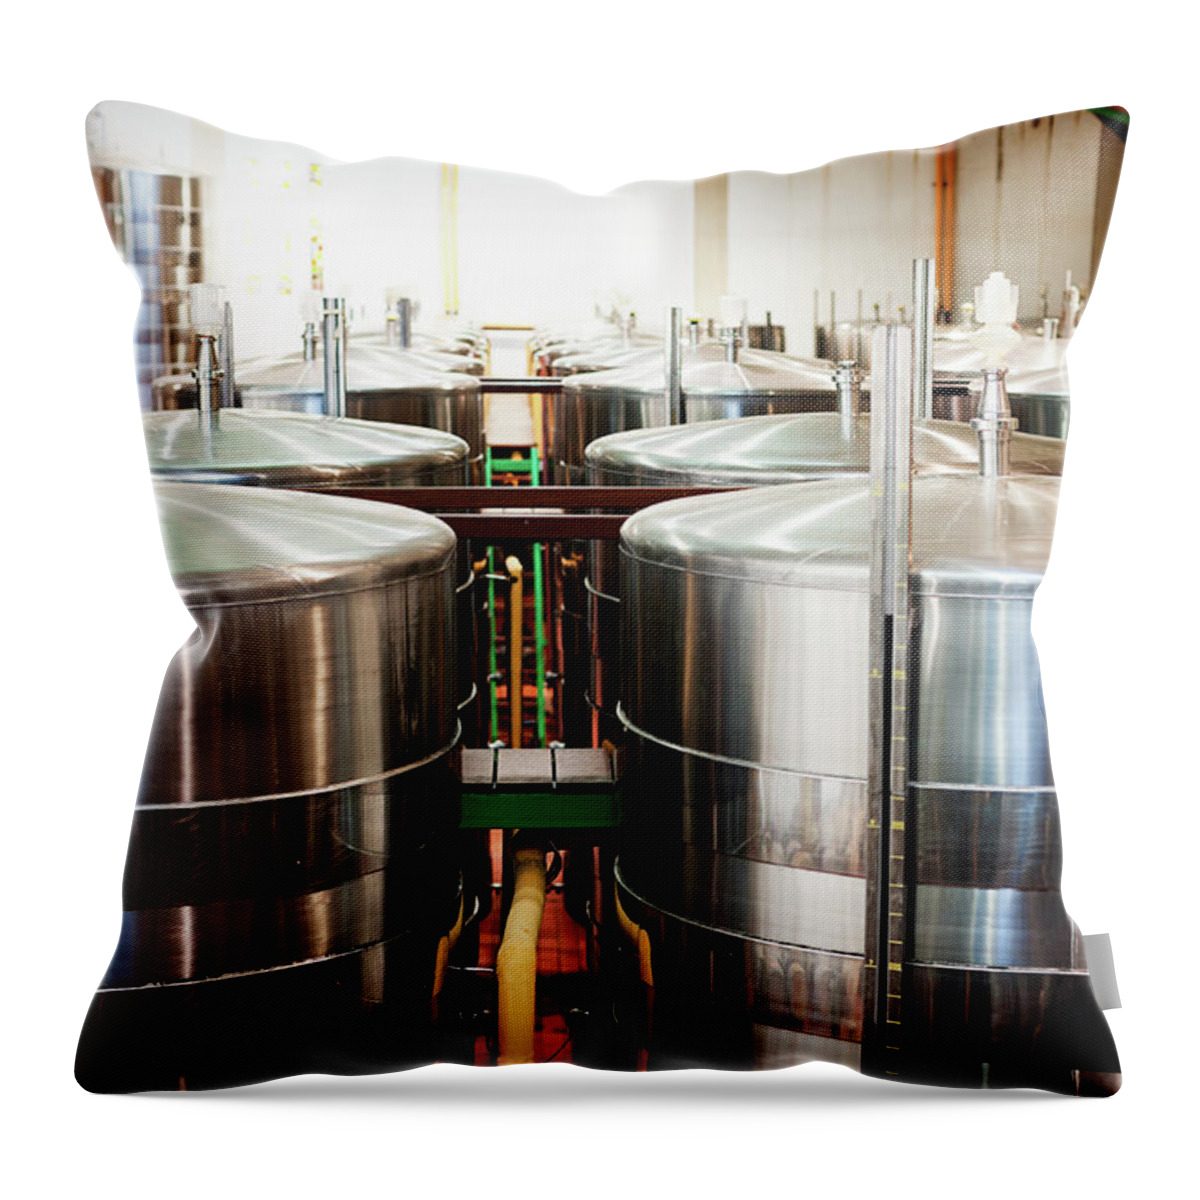 Working Throw Pillow featuring the photograph Stainless Steel Holding Tanks In A by Rapideye